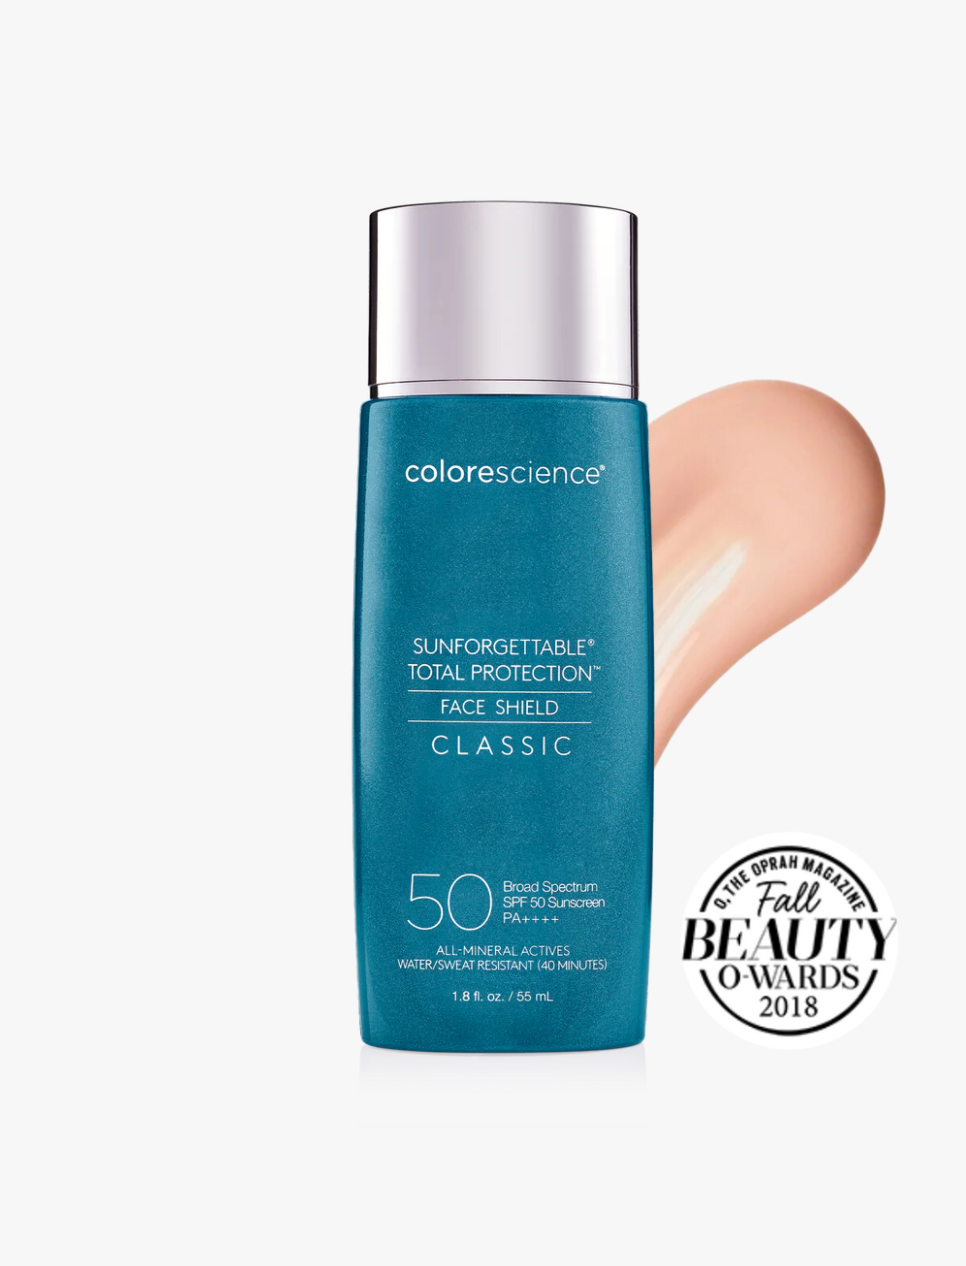 Sunforgettable Total Protection Face Shield SPF 50 con Color